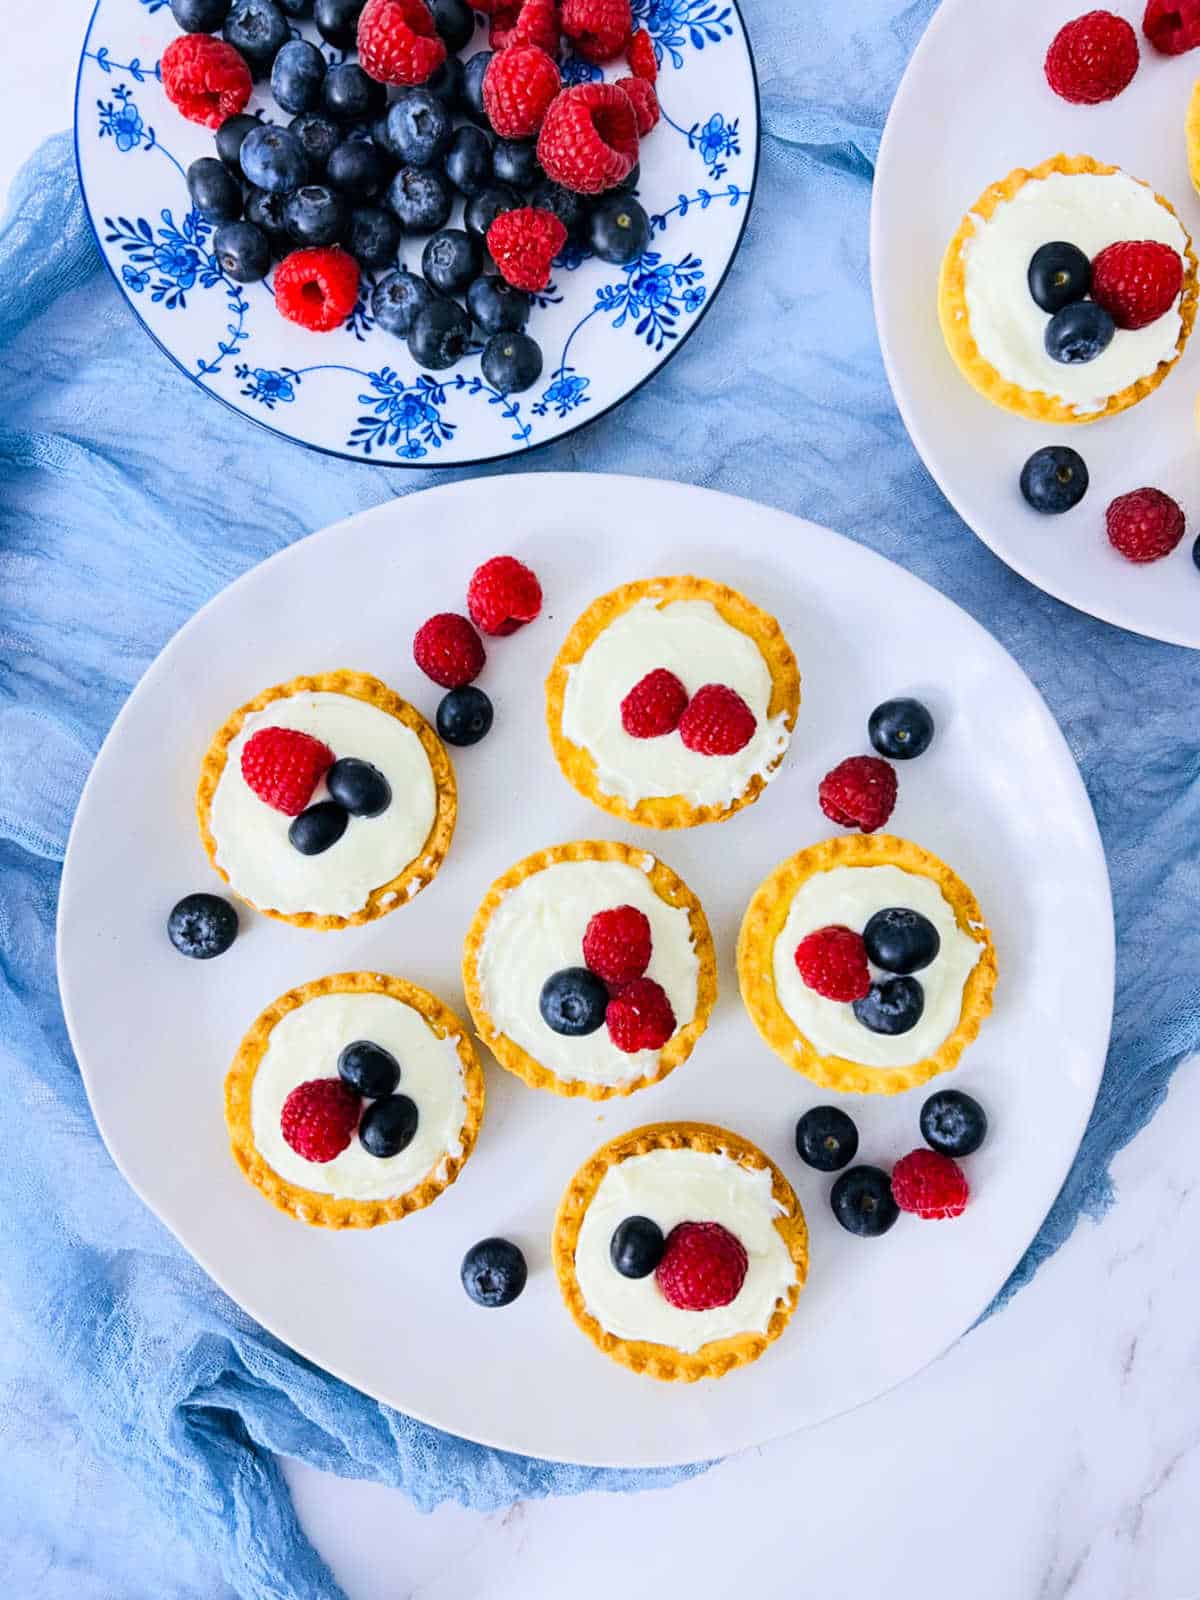 Shrikhand tarts placed on a white plate with berries in the background.